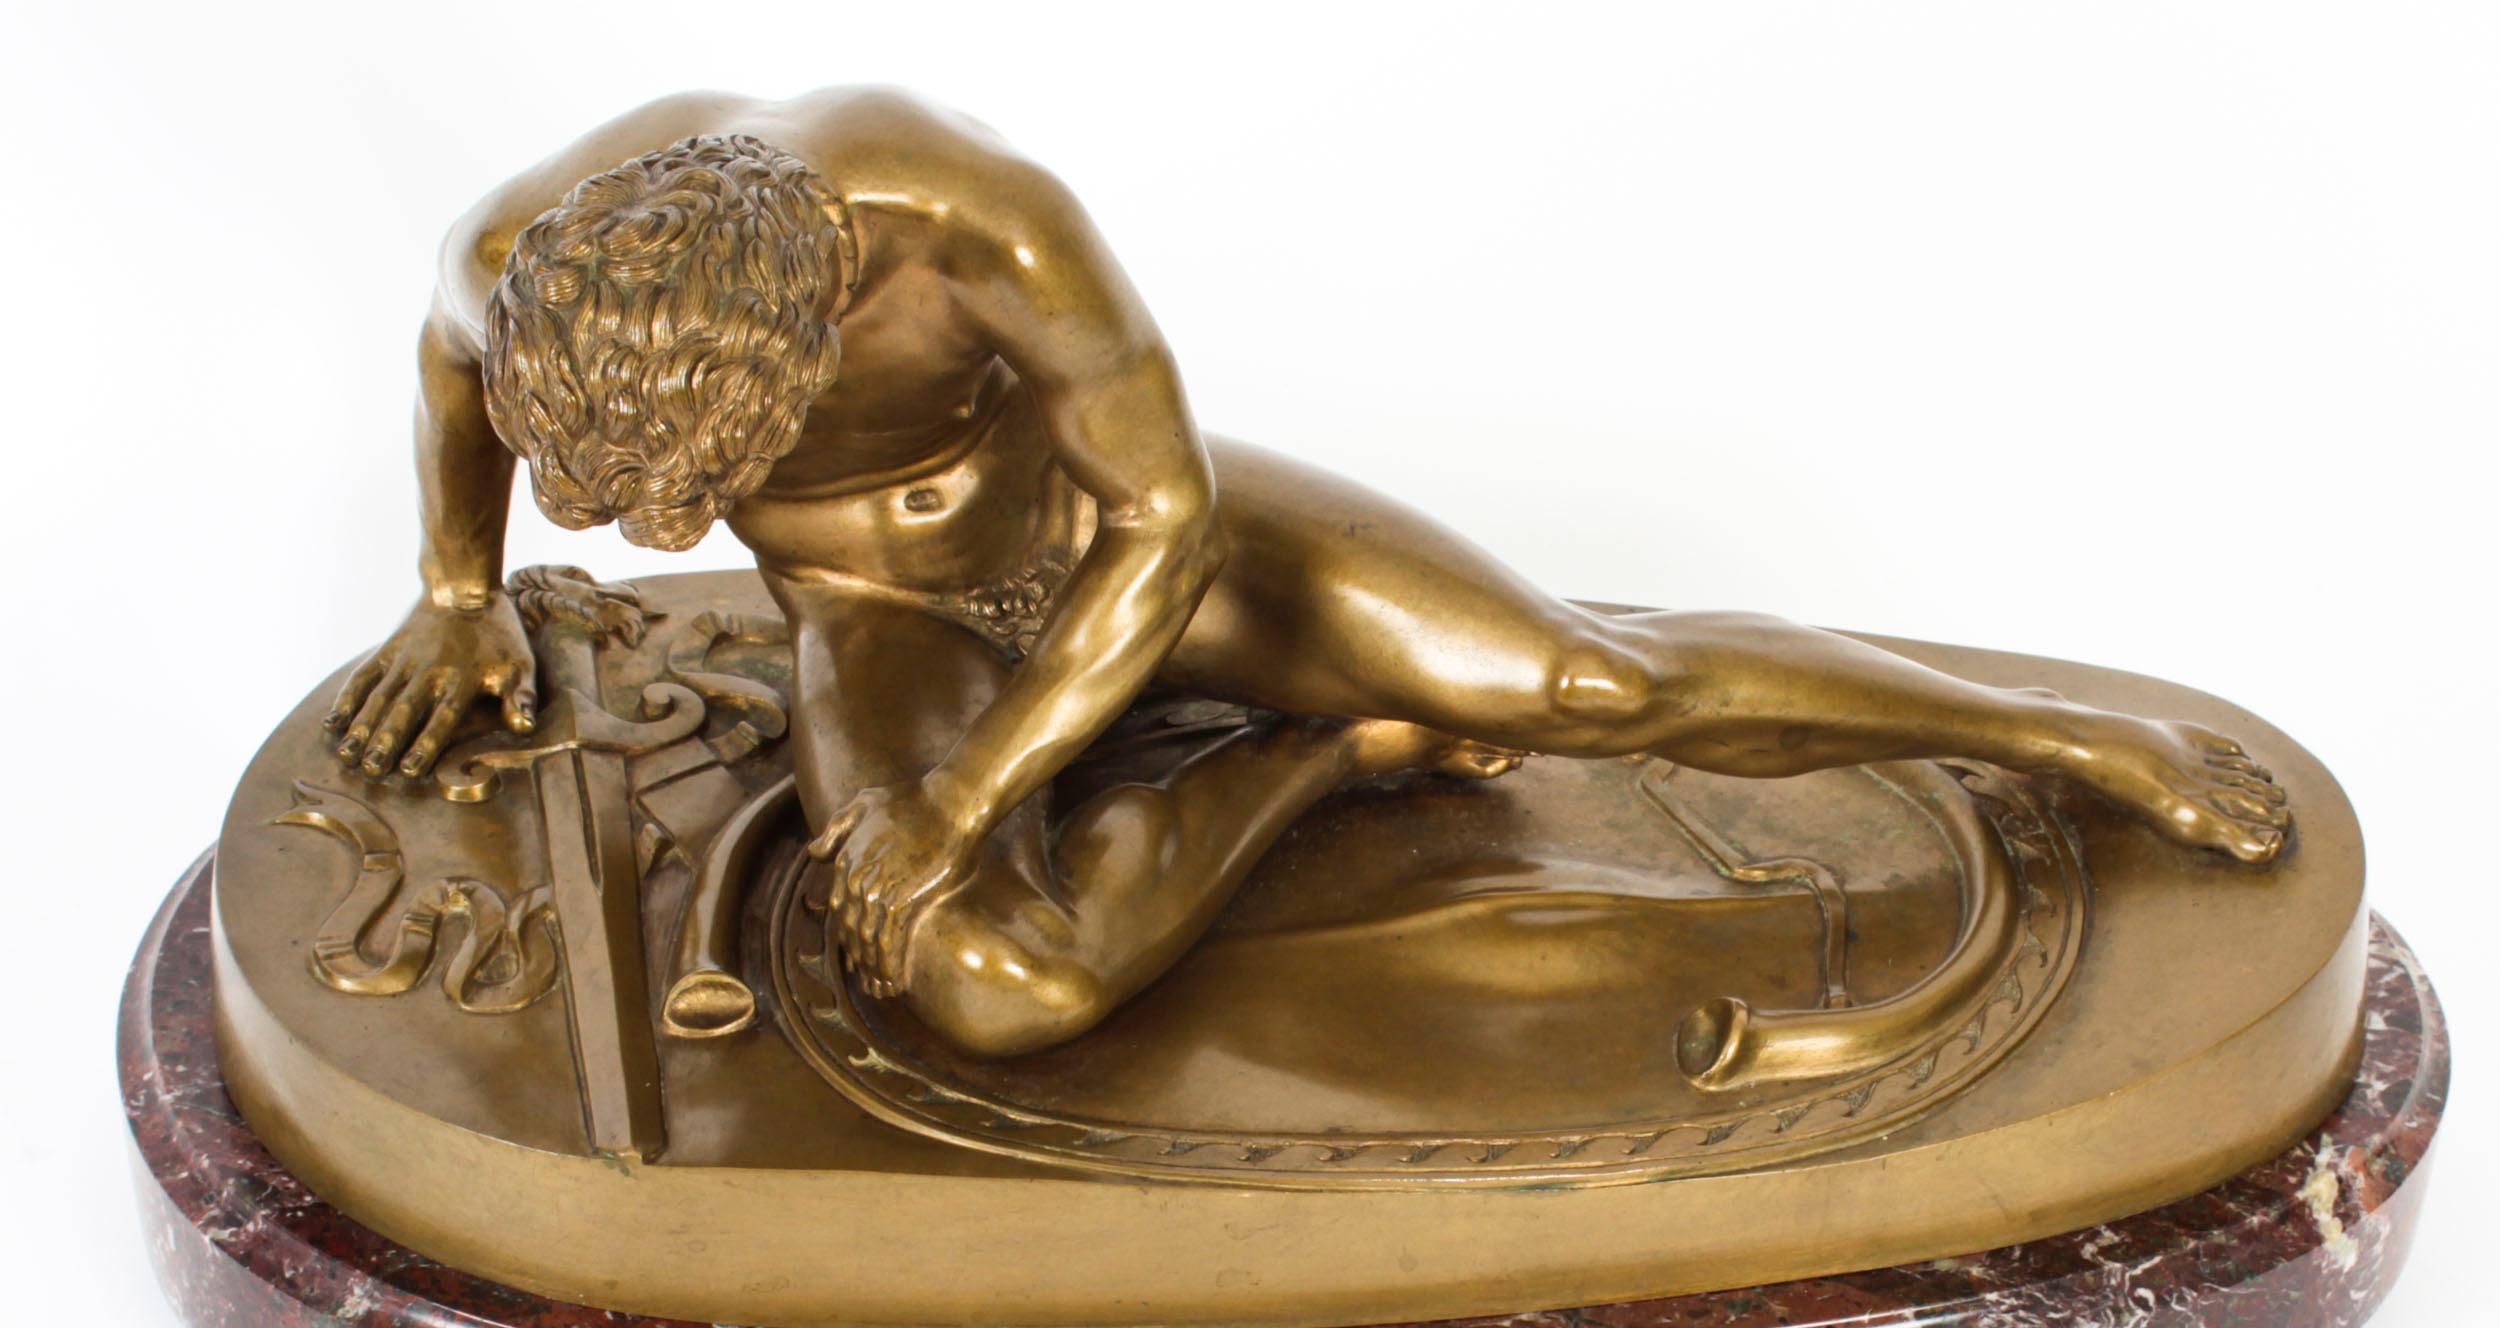 Italian Antique Bronze Sculpture of the Dying Gaul by B Boschetti Rome, 19th Century For Sale